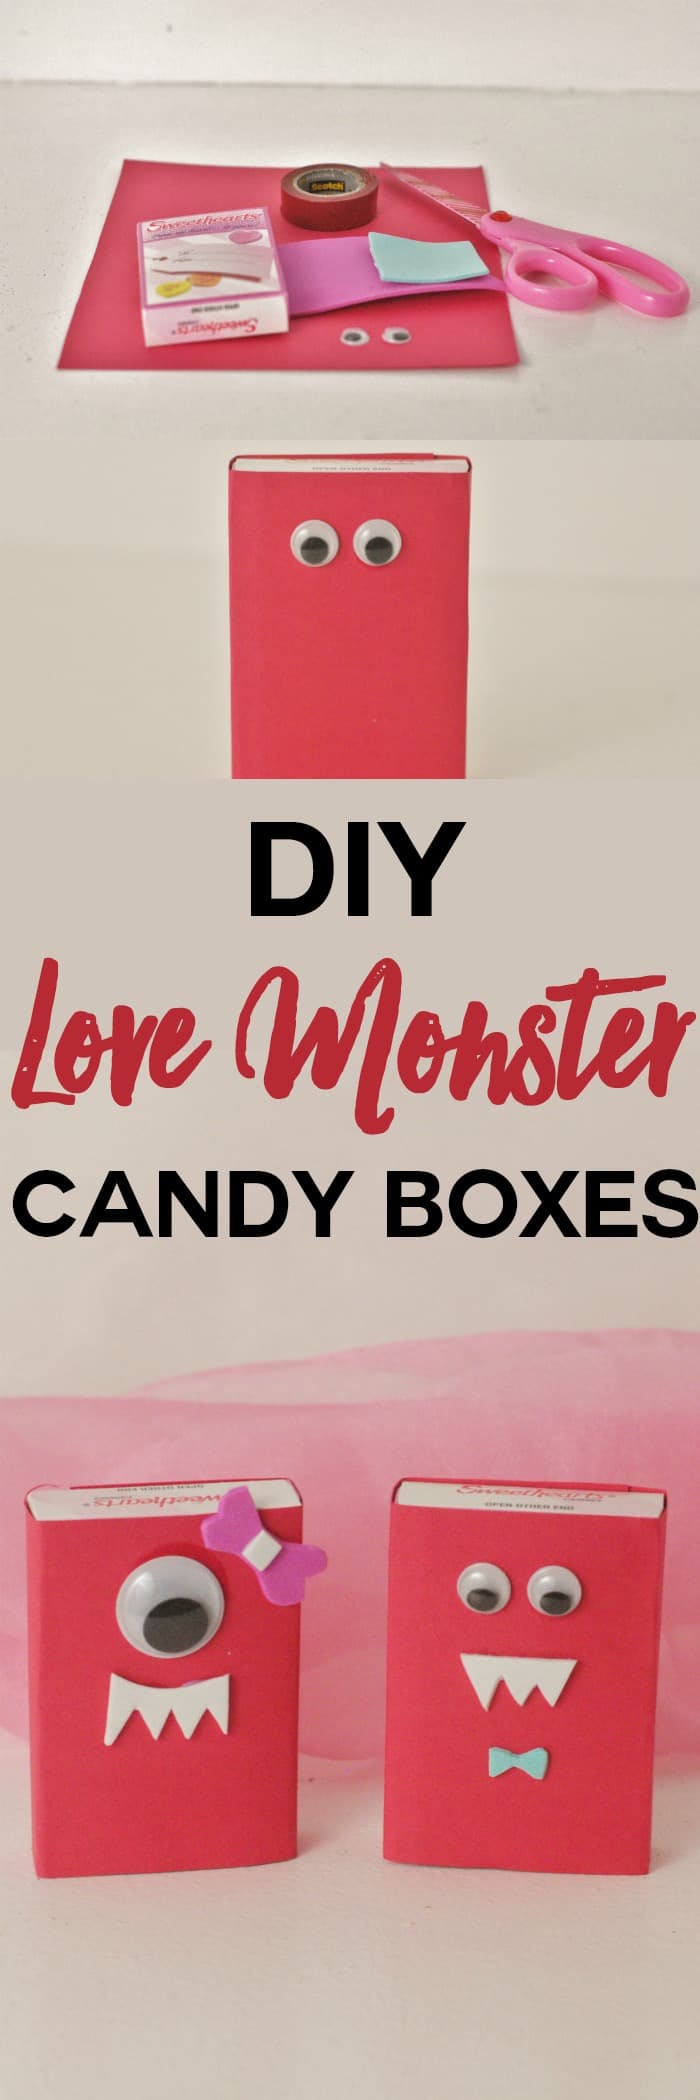 DIY Love Monster Valentine's Day Candy Boxes